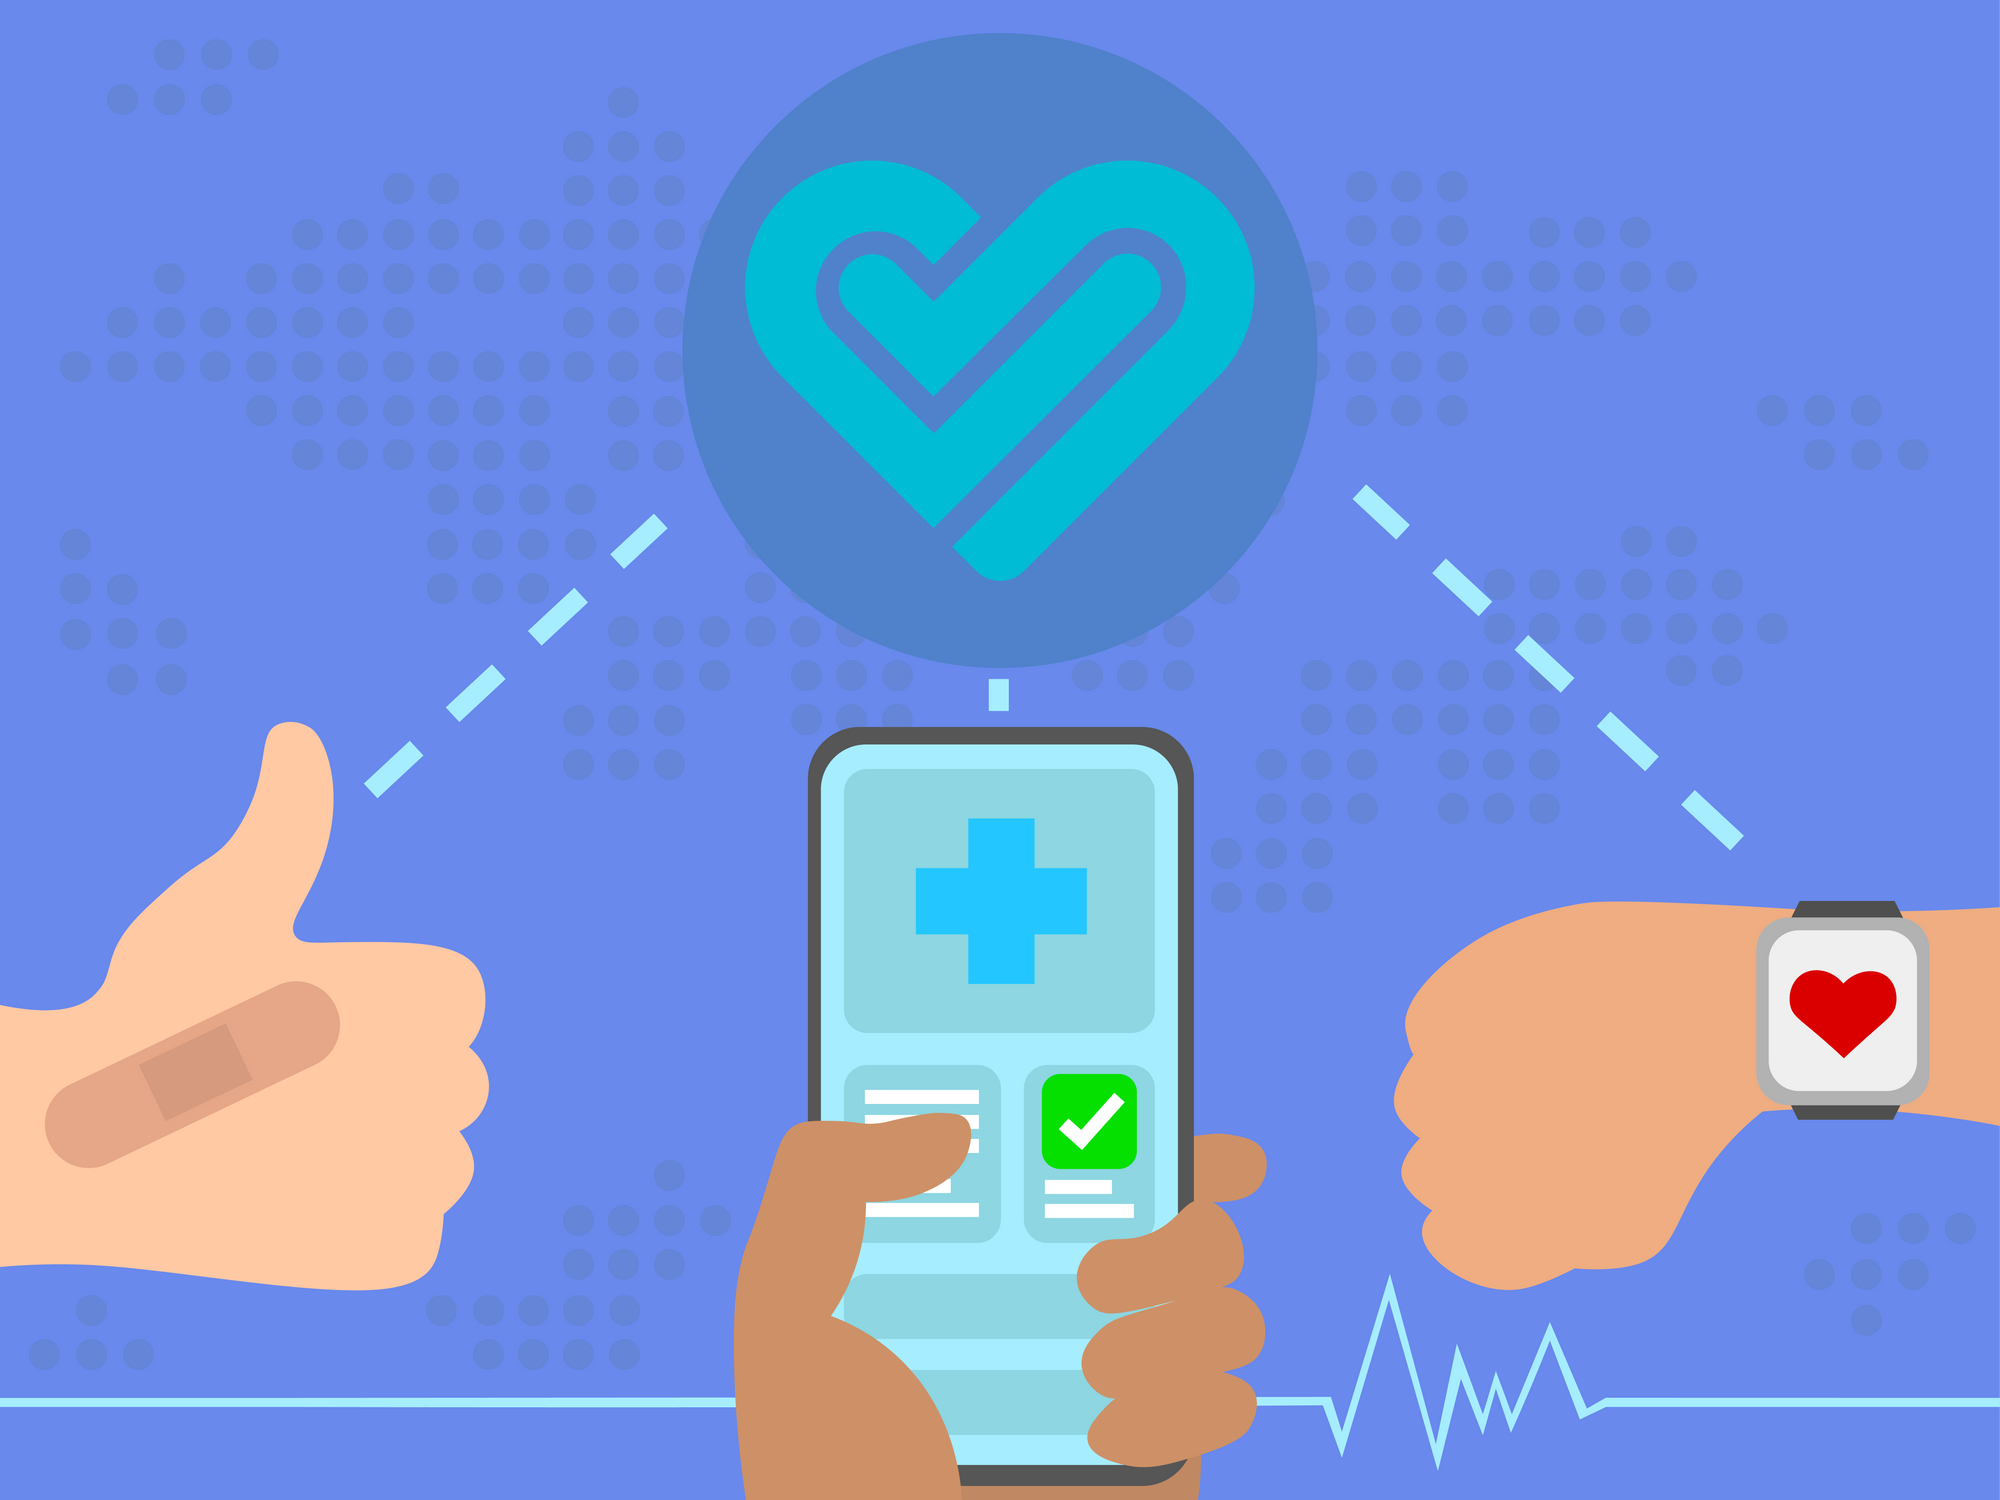 How Real-Time Data Is Helping Physicians Track Their Patients, One Heartbeat at a Time